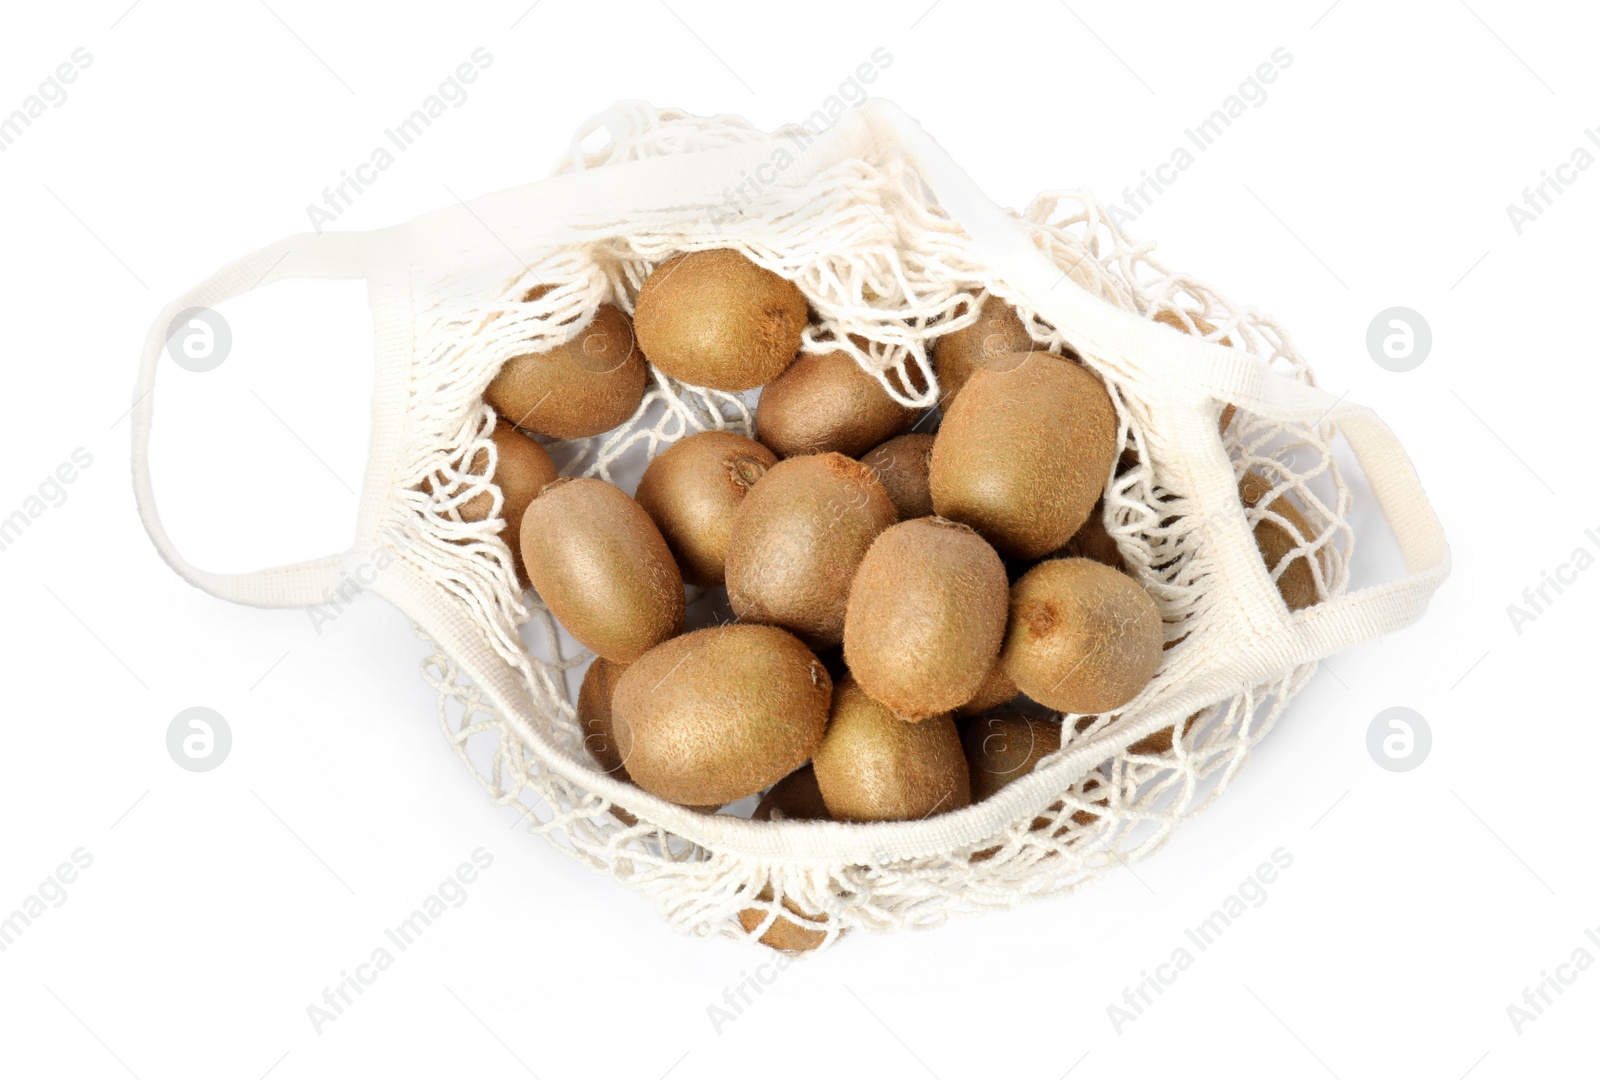 Photo of Whole fresh kiwis in net bag isolated on white, top view